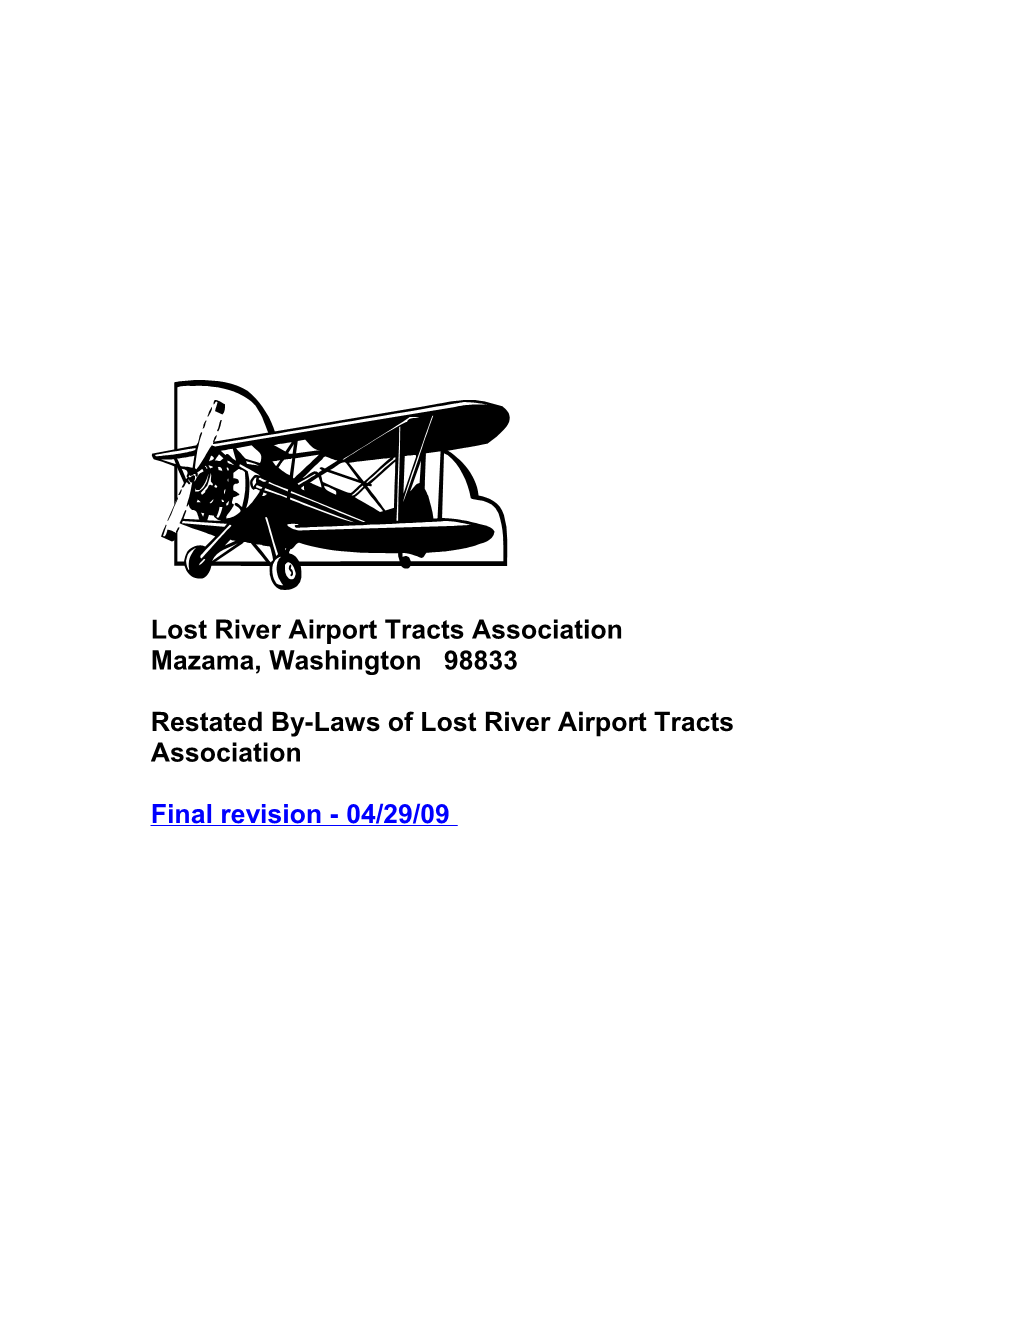 Restated By-Laws of Lost Riverairporttracts Association